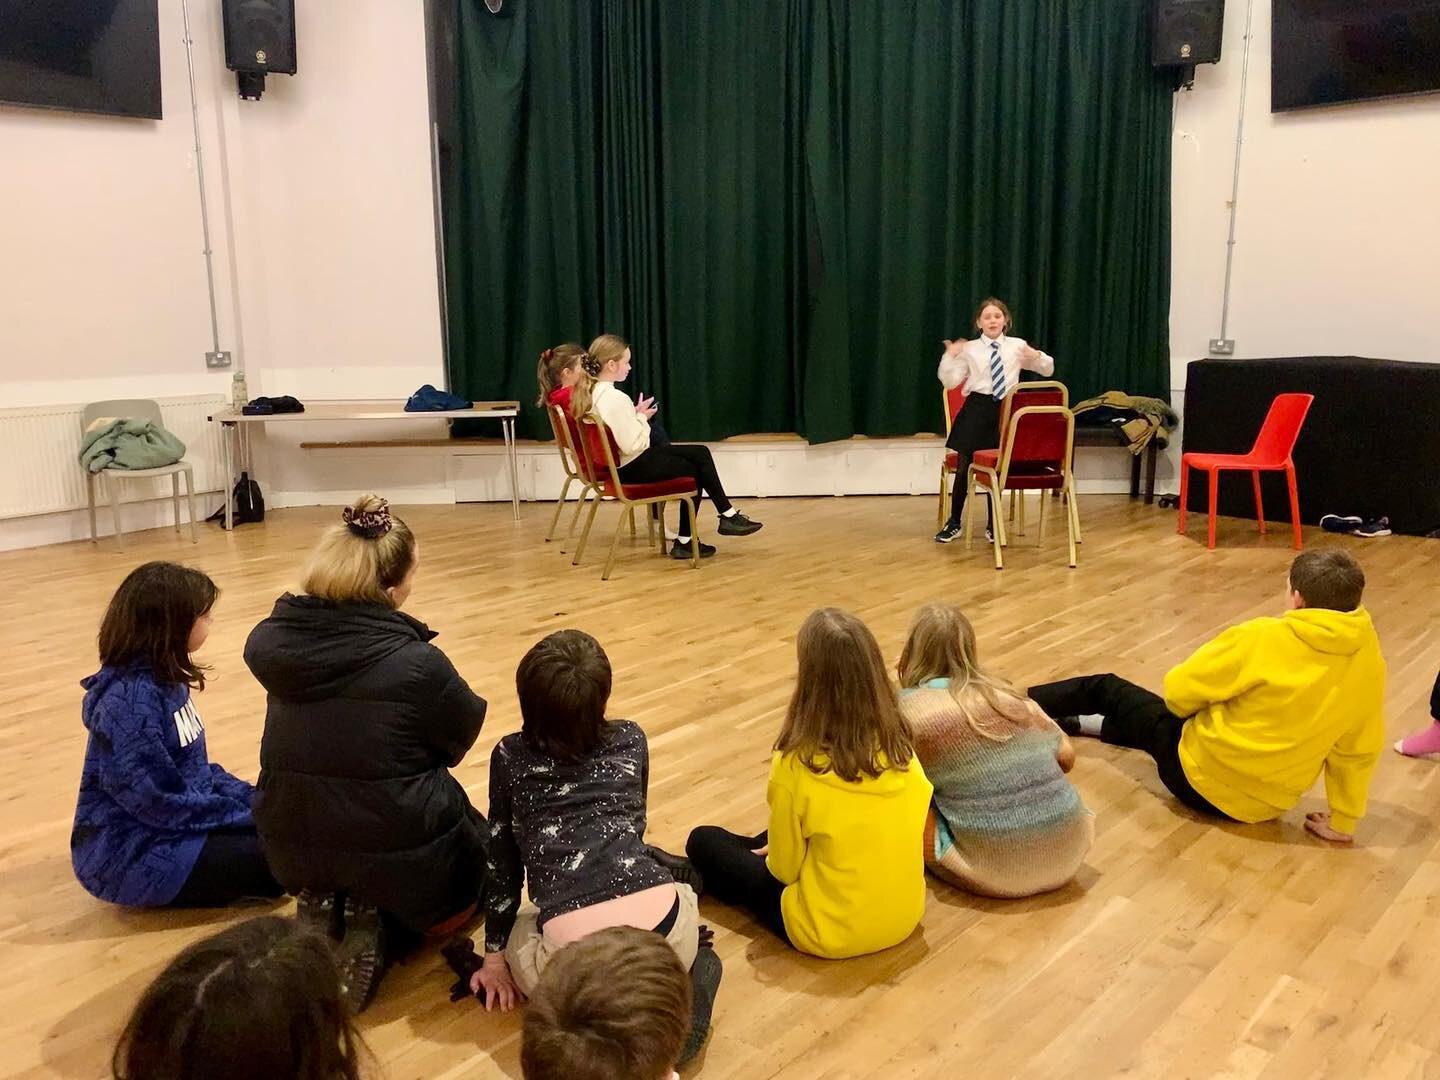 We&rsquo;ve had a great week getting back into all things drama with our various different groups across edinburgh!⭐️ Here are some pictures from some scene work by our Stockbridge 9-12&rsquo;s on Monday night, who were making us laugh with our &lsqu